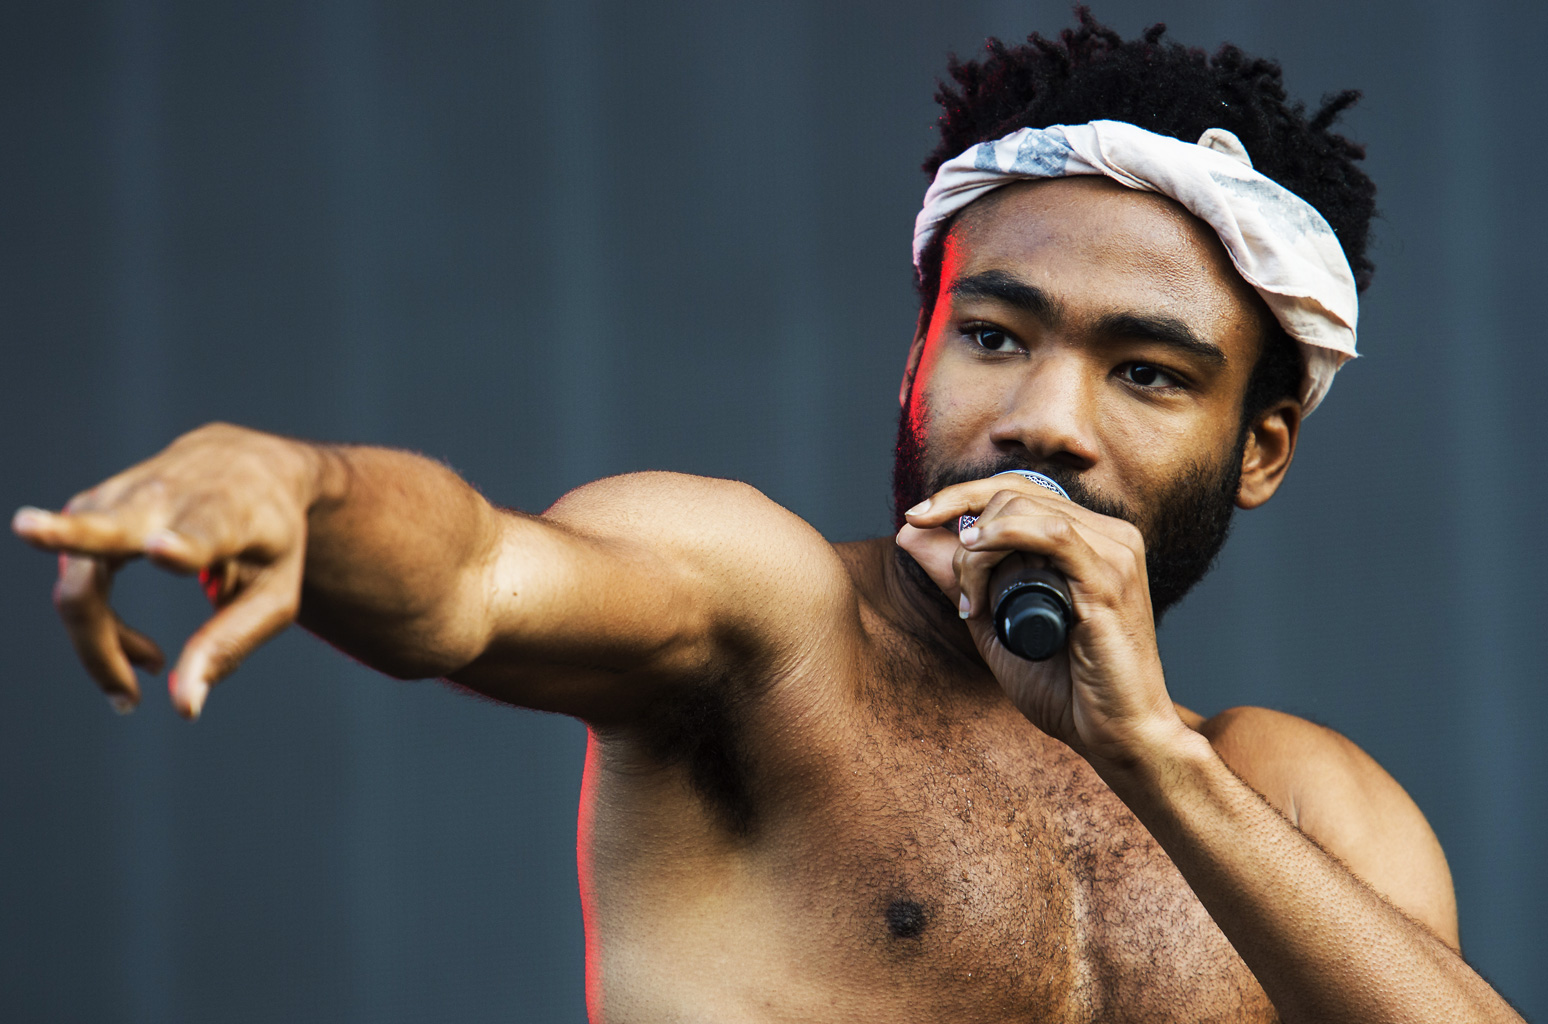 Childish Gambino Signs New Deal With RCA, New Music Expected Later This Year